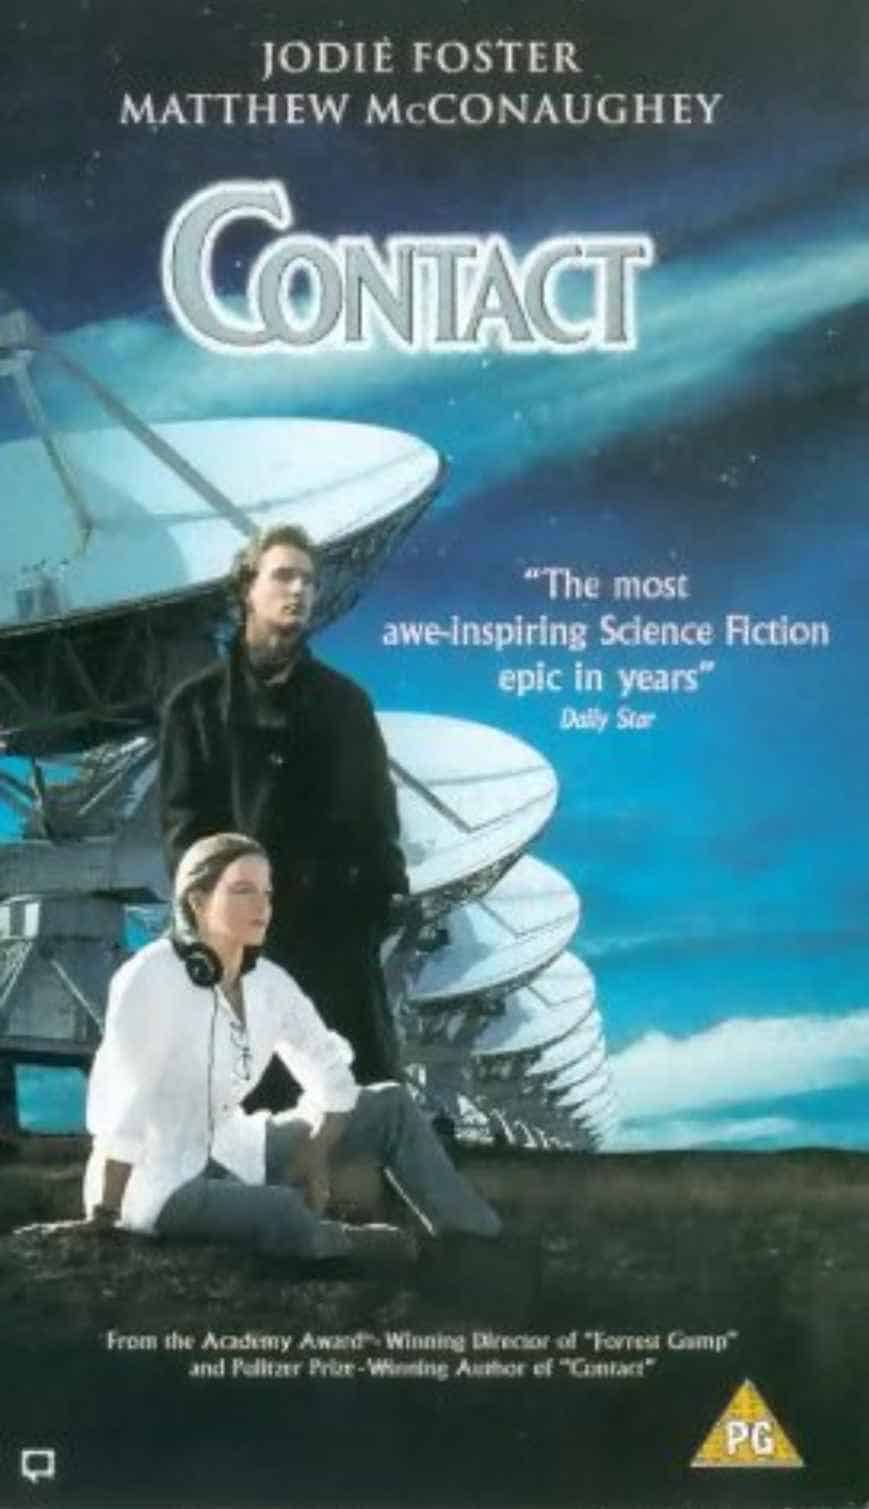 Arrival like movies Contact (1997)